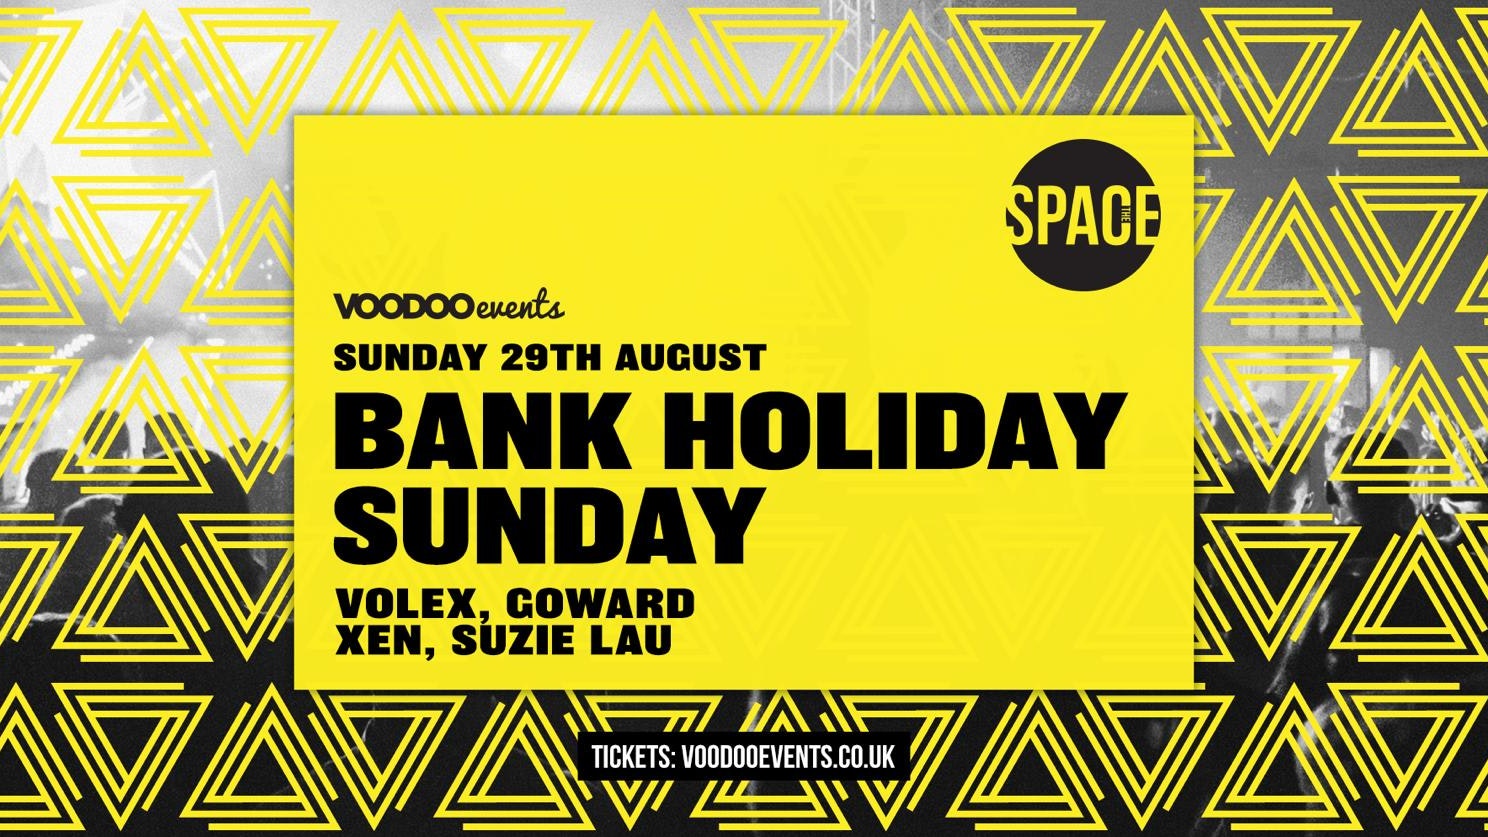 Bank Holiday Sunday at Space – 29th August